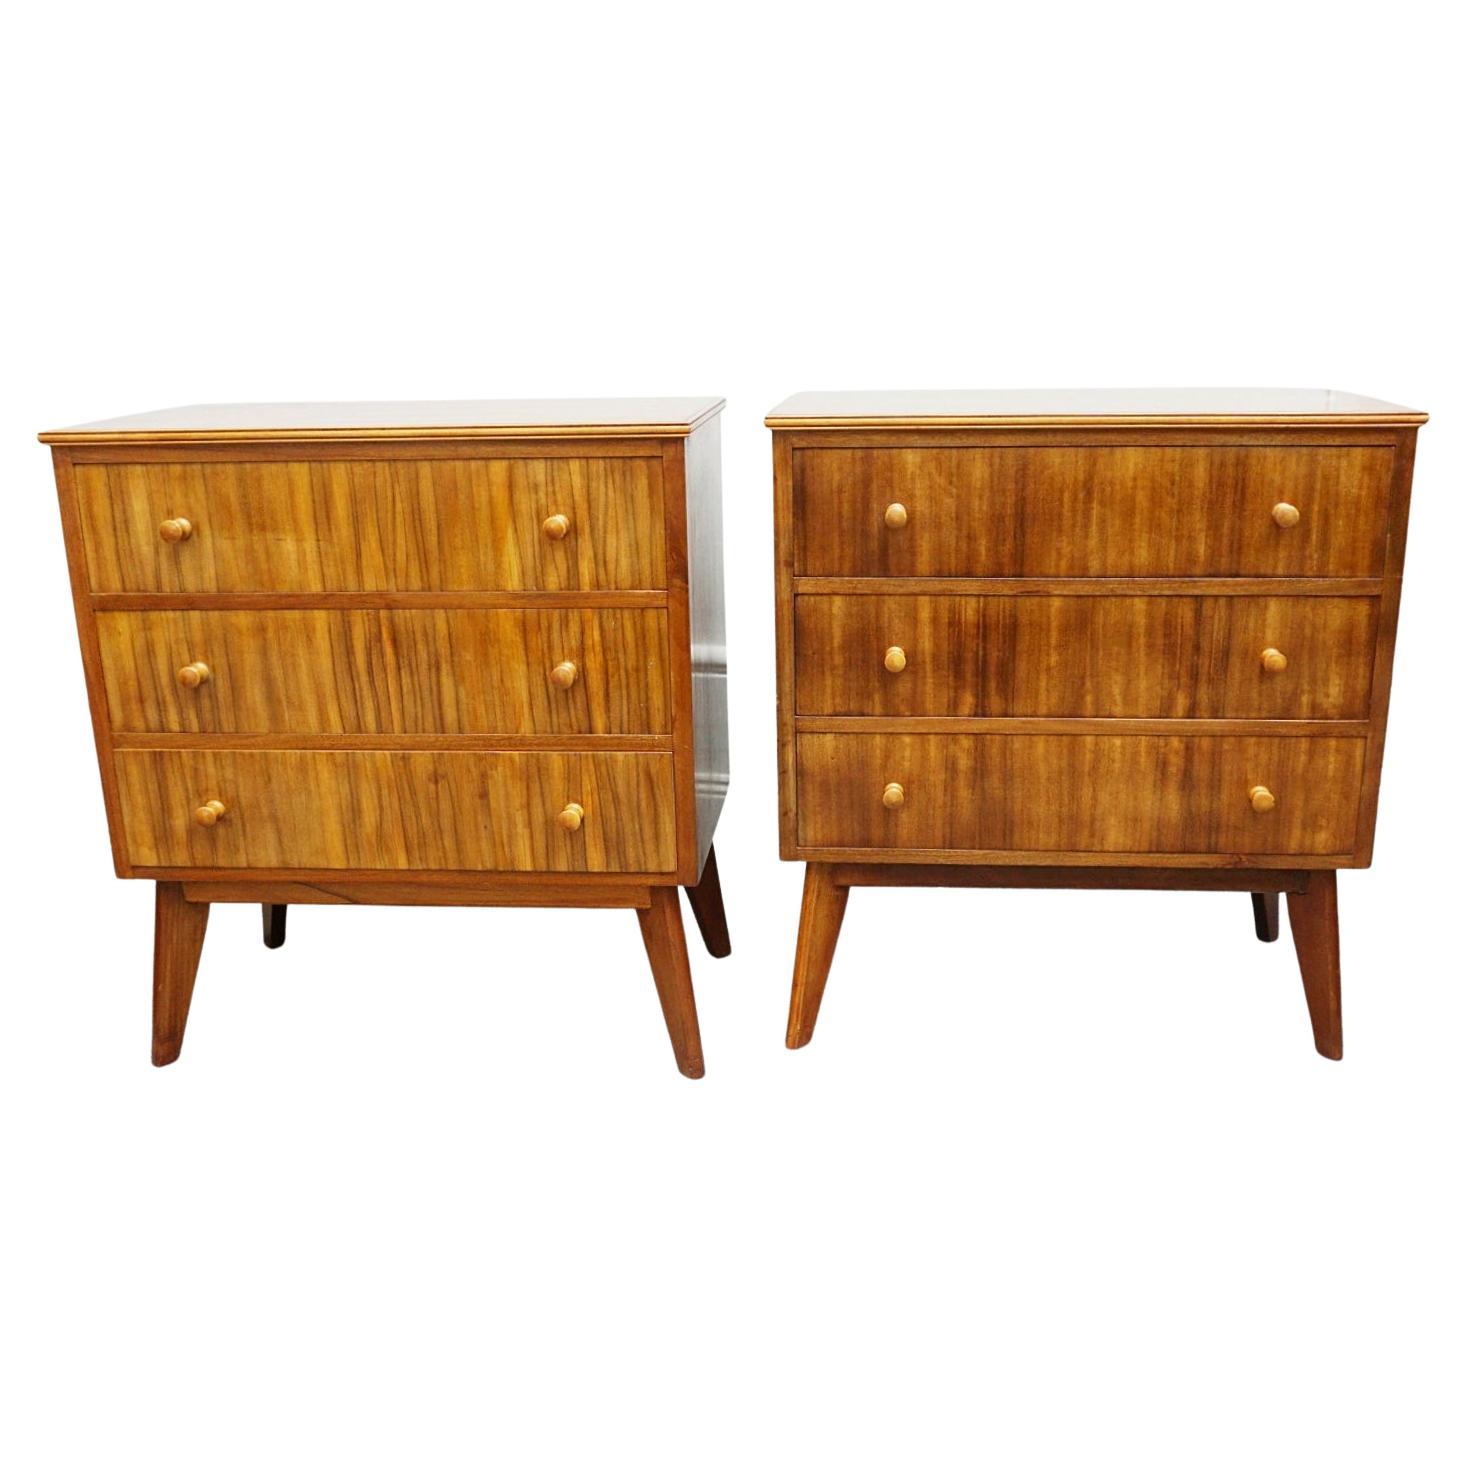 Pair of Mid-Century Modern Chests of Drawers circa 1950